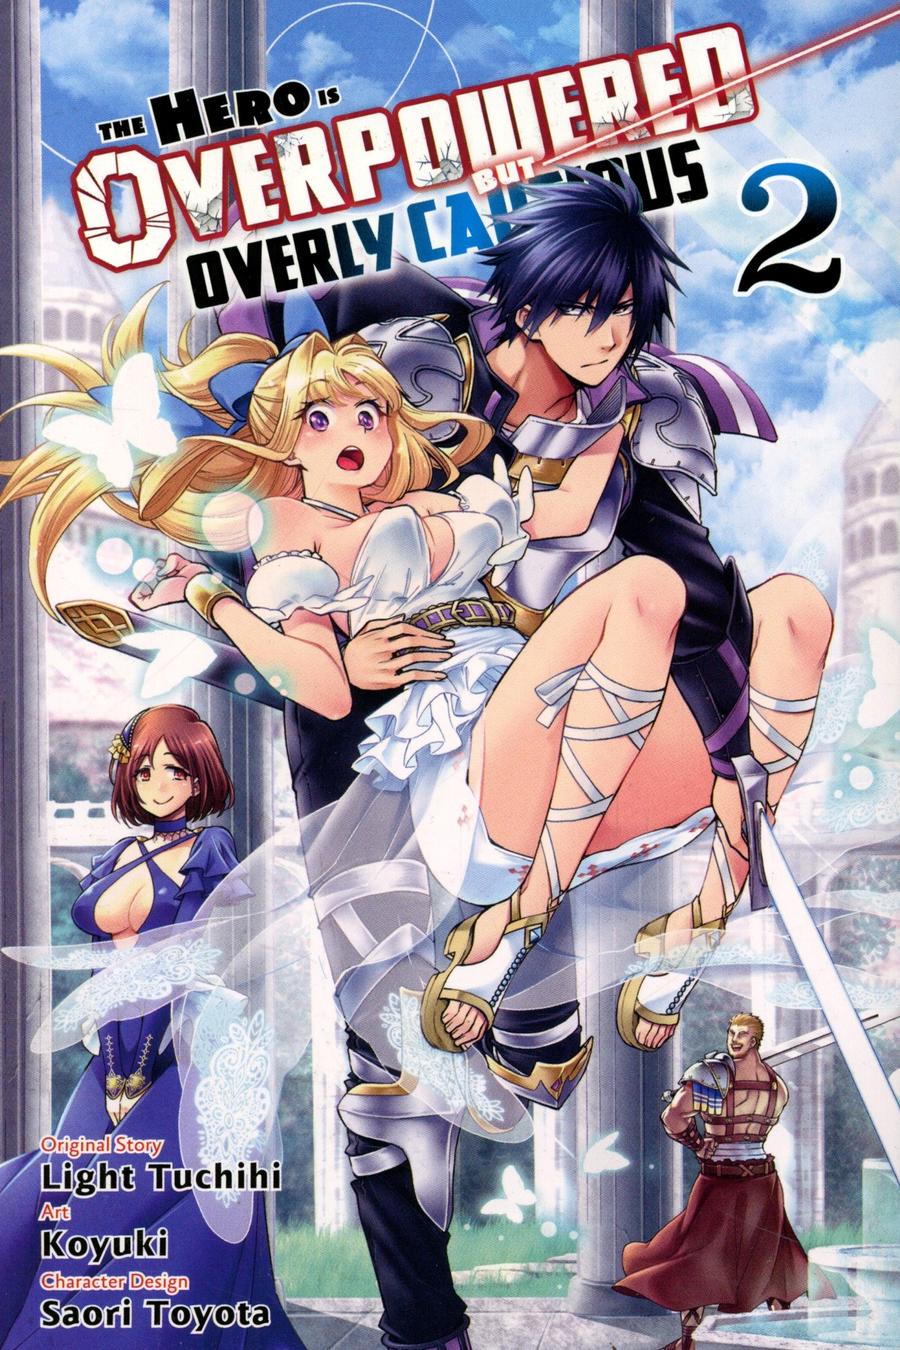 Hero Is Overpowered But Overly Cautious Vol 2 GN